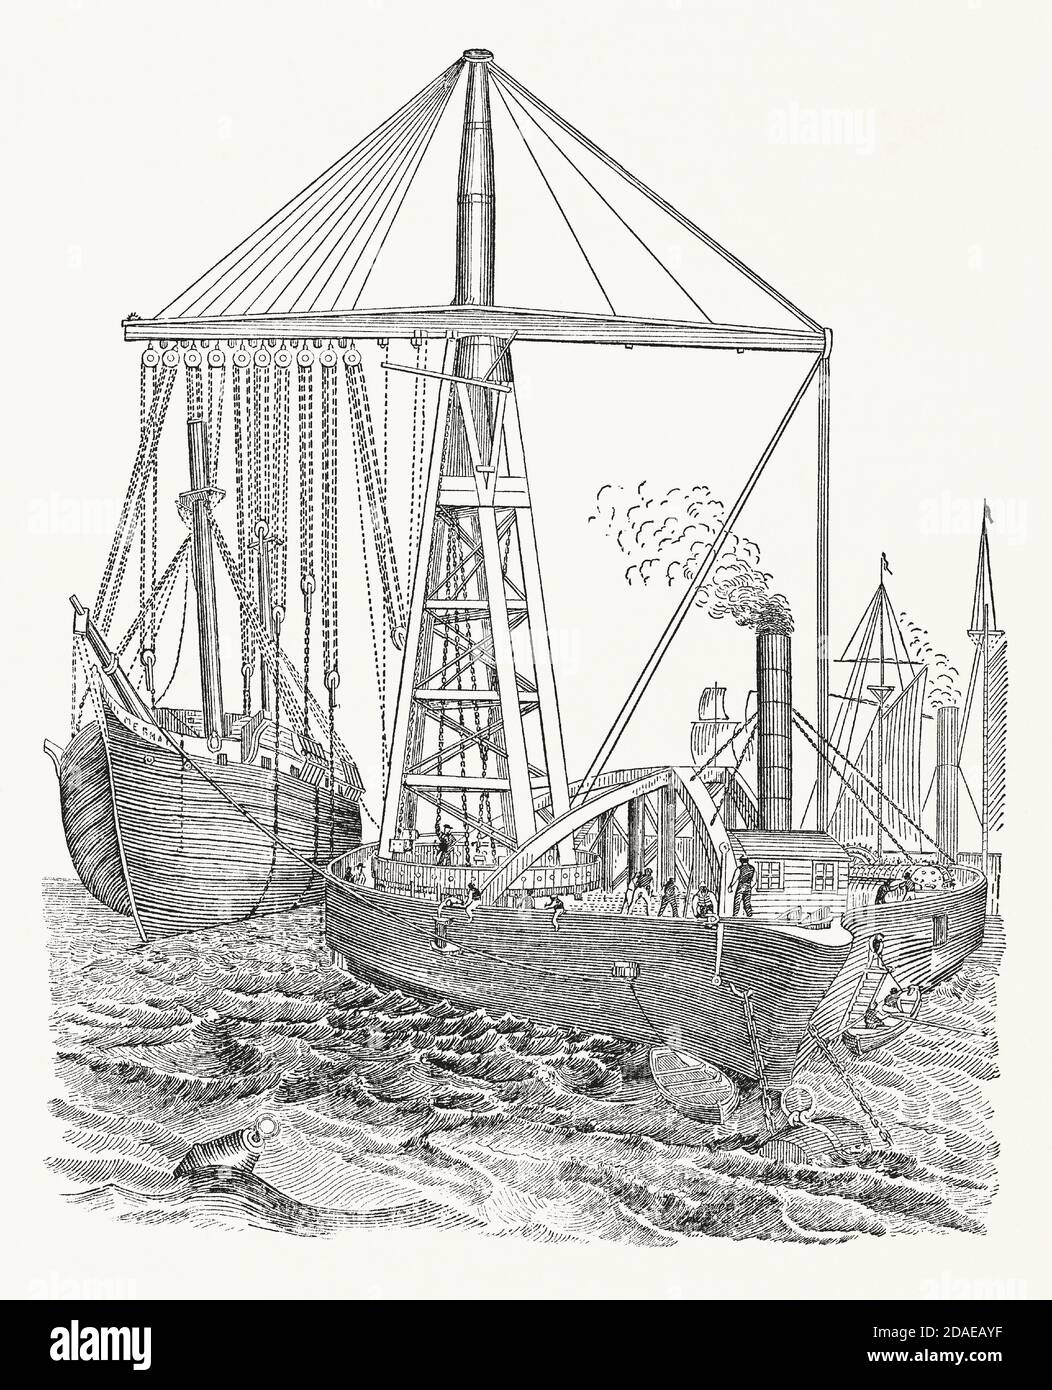 An old engraving showing Bishop’s floating derrick c.1850. It is from a Victorian mechanical engineering book of the 1880s. In this illustration the massive steam-powered derrick is lifting another ship. It was a flat-bottomed boat, built by the Thames Iron Shipbuilding Company of Blackwall, London, England, UK to raise sunken ships. It was 270 feet in length and had a 90-foot beam. Watertight compartments could be filled with seawater to counterbalance any weight on the opposite side of the vessel when lifting. Derricks mounted on dedicated vessels are also known as sheerlegs. Stock Photo